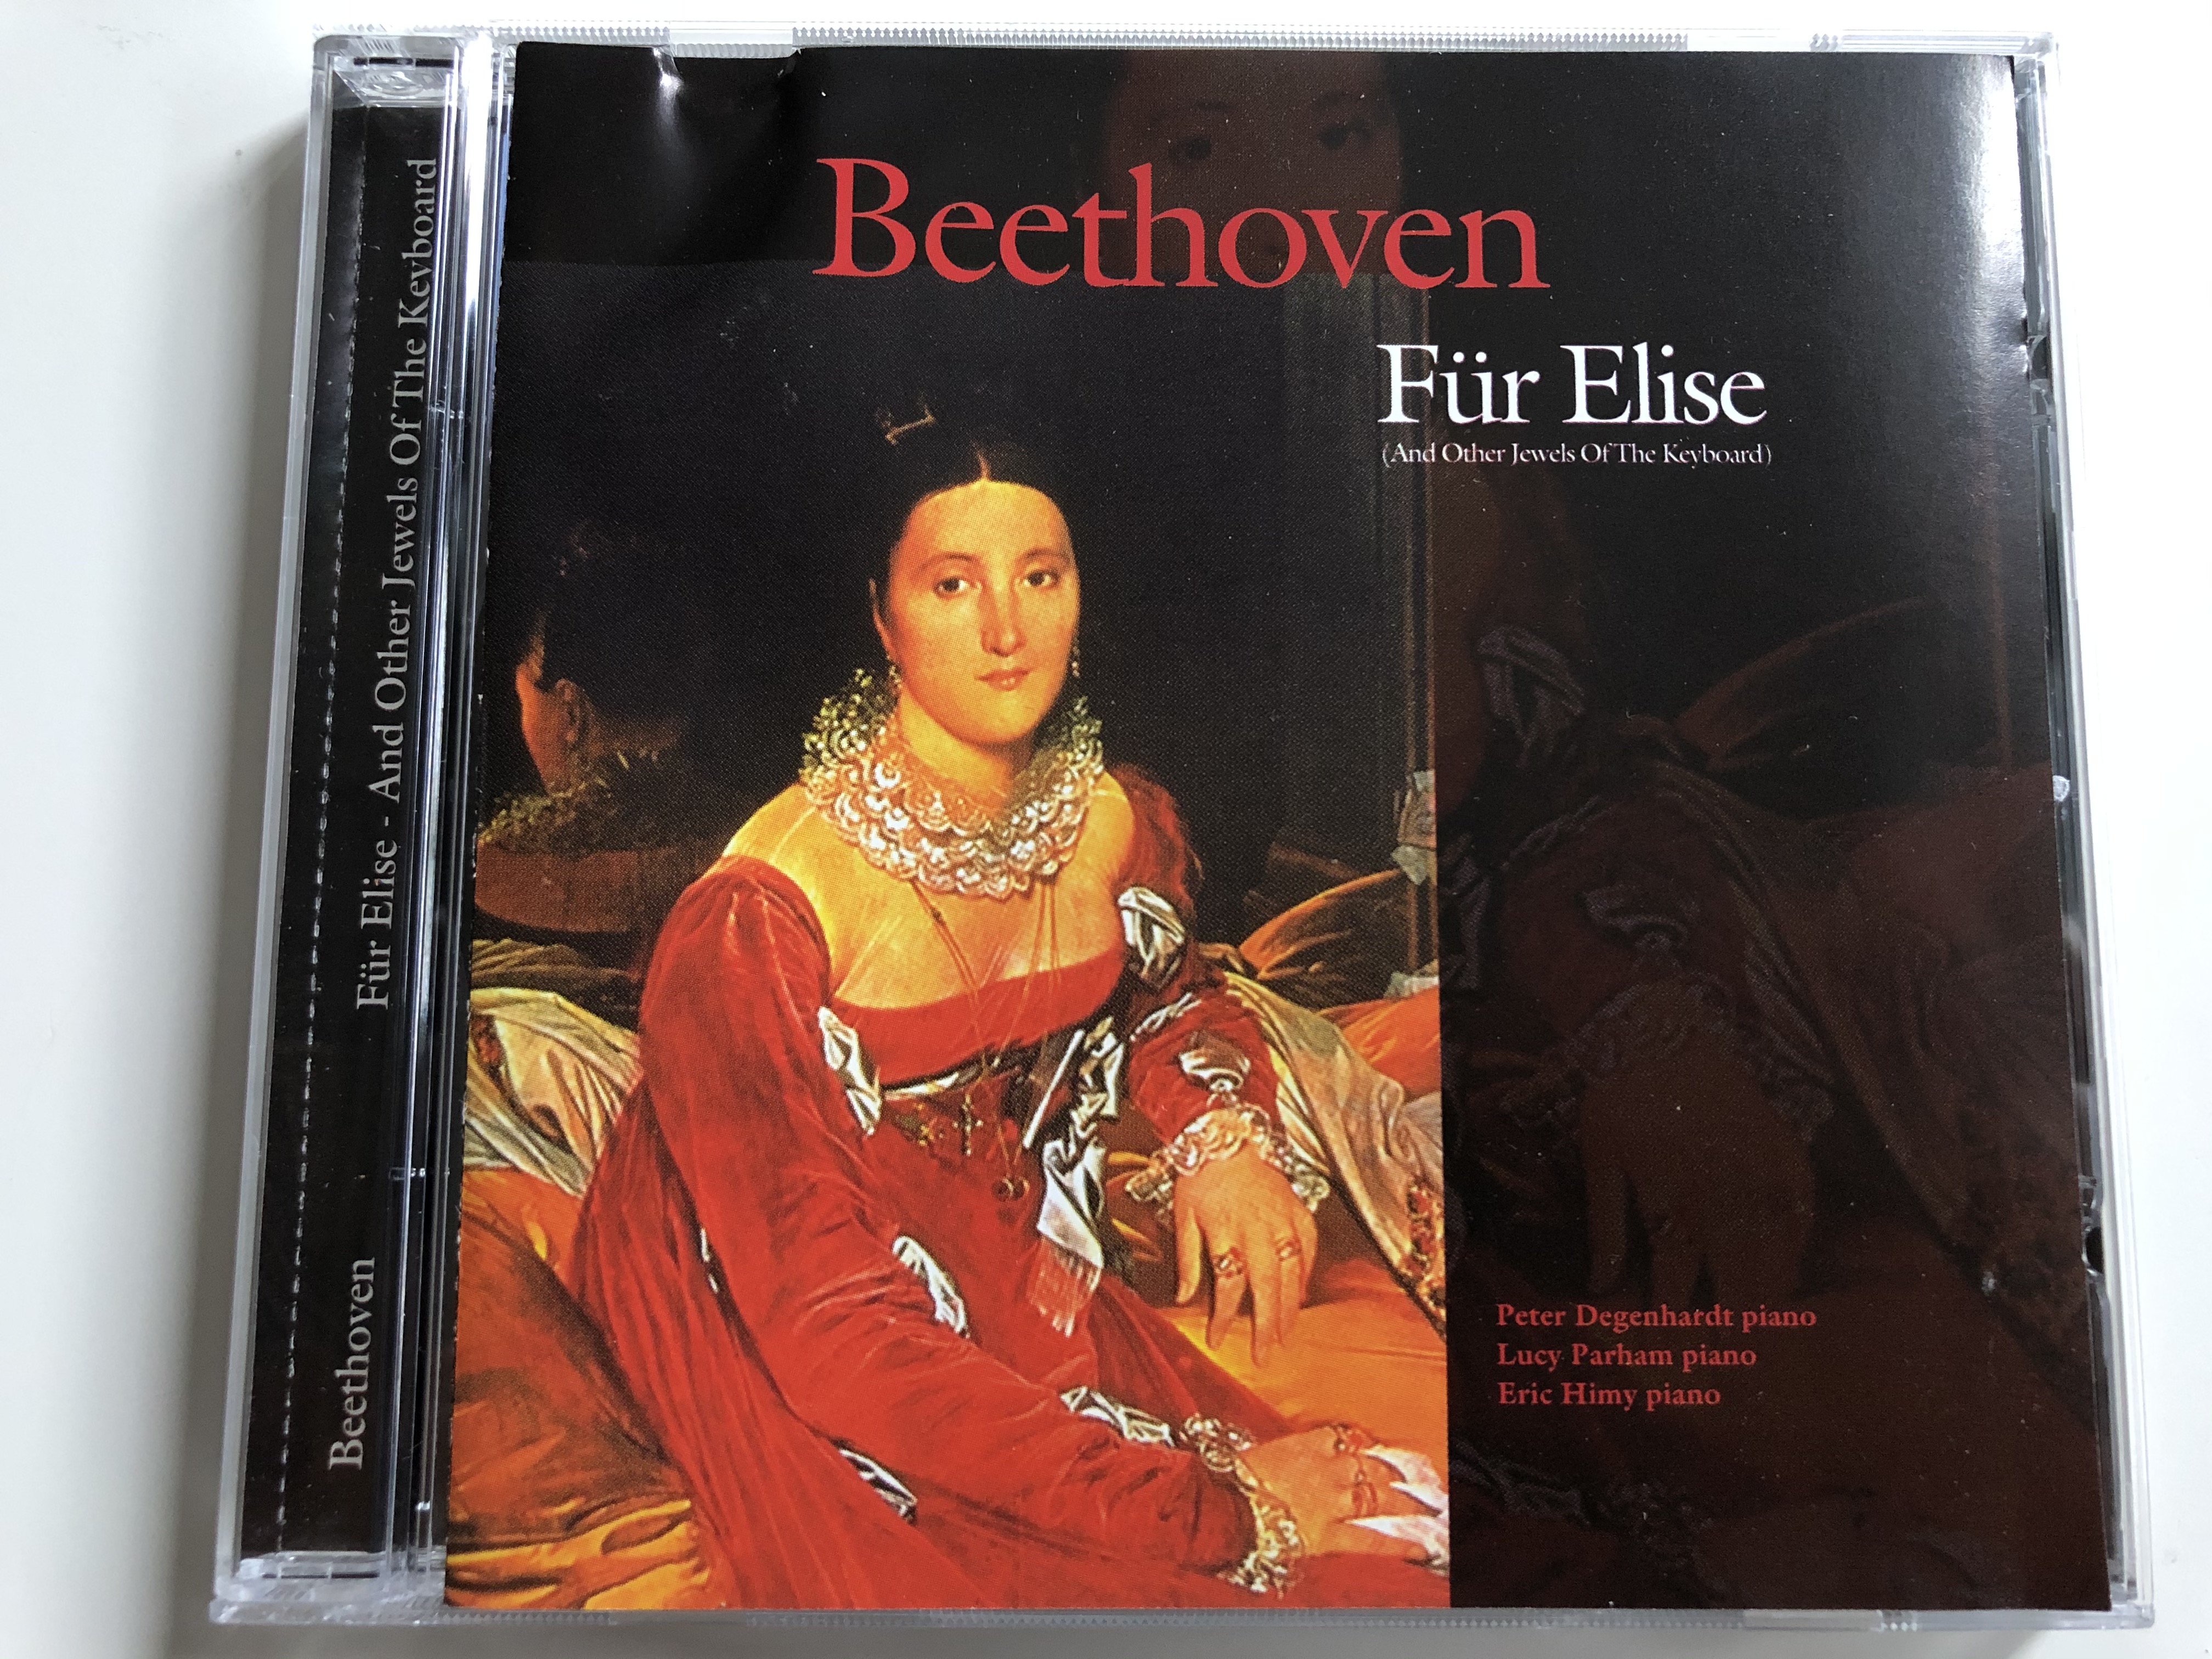 beethoven-f-r-elise-and-other-jewels-of-the-keyboard-piano-peter-degenhardt-lucy-parham-eric-himy-a-play-classics-audio-cd-1998-9023-2-1-.jpg